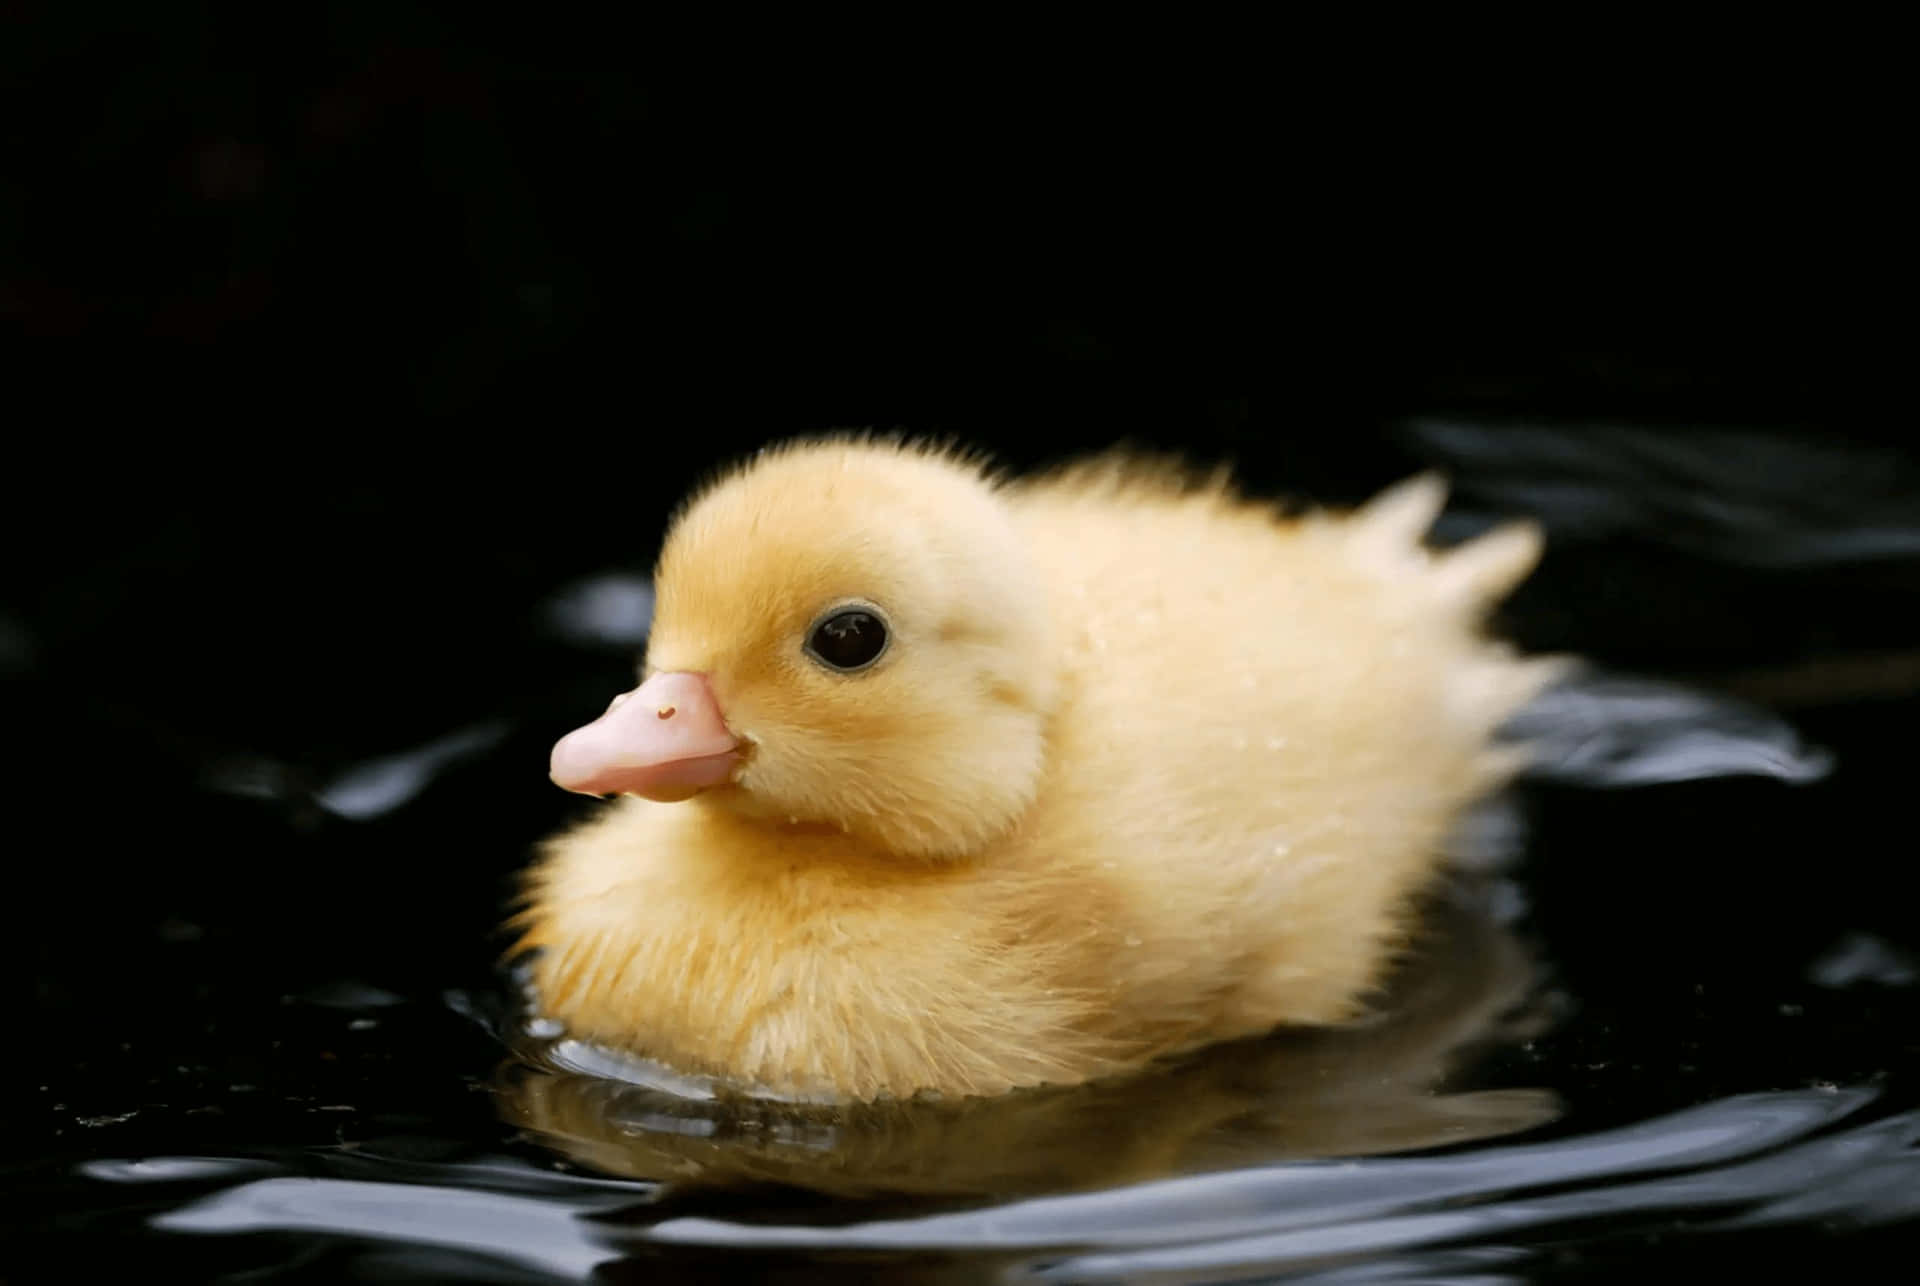 Some days, a cute little baby duck is the best way to start your day.